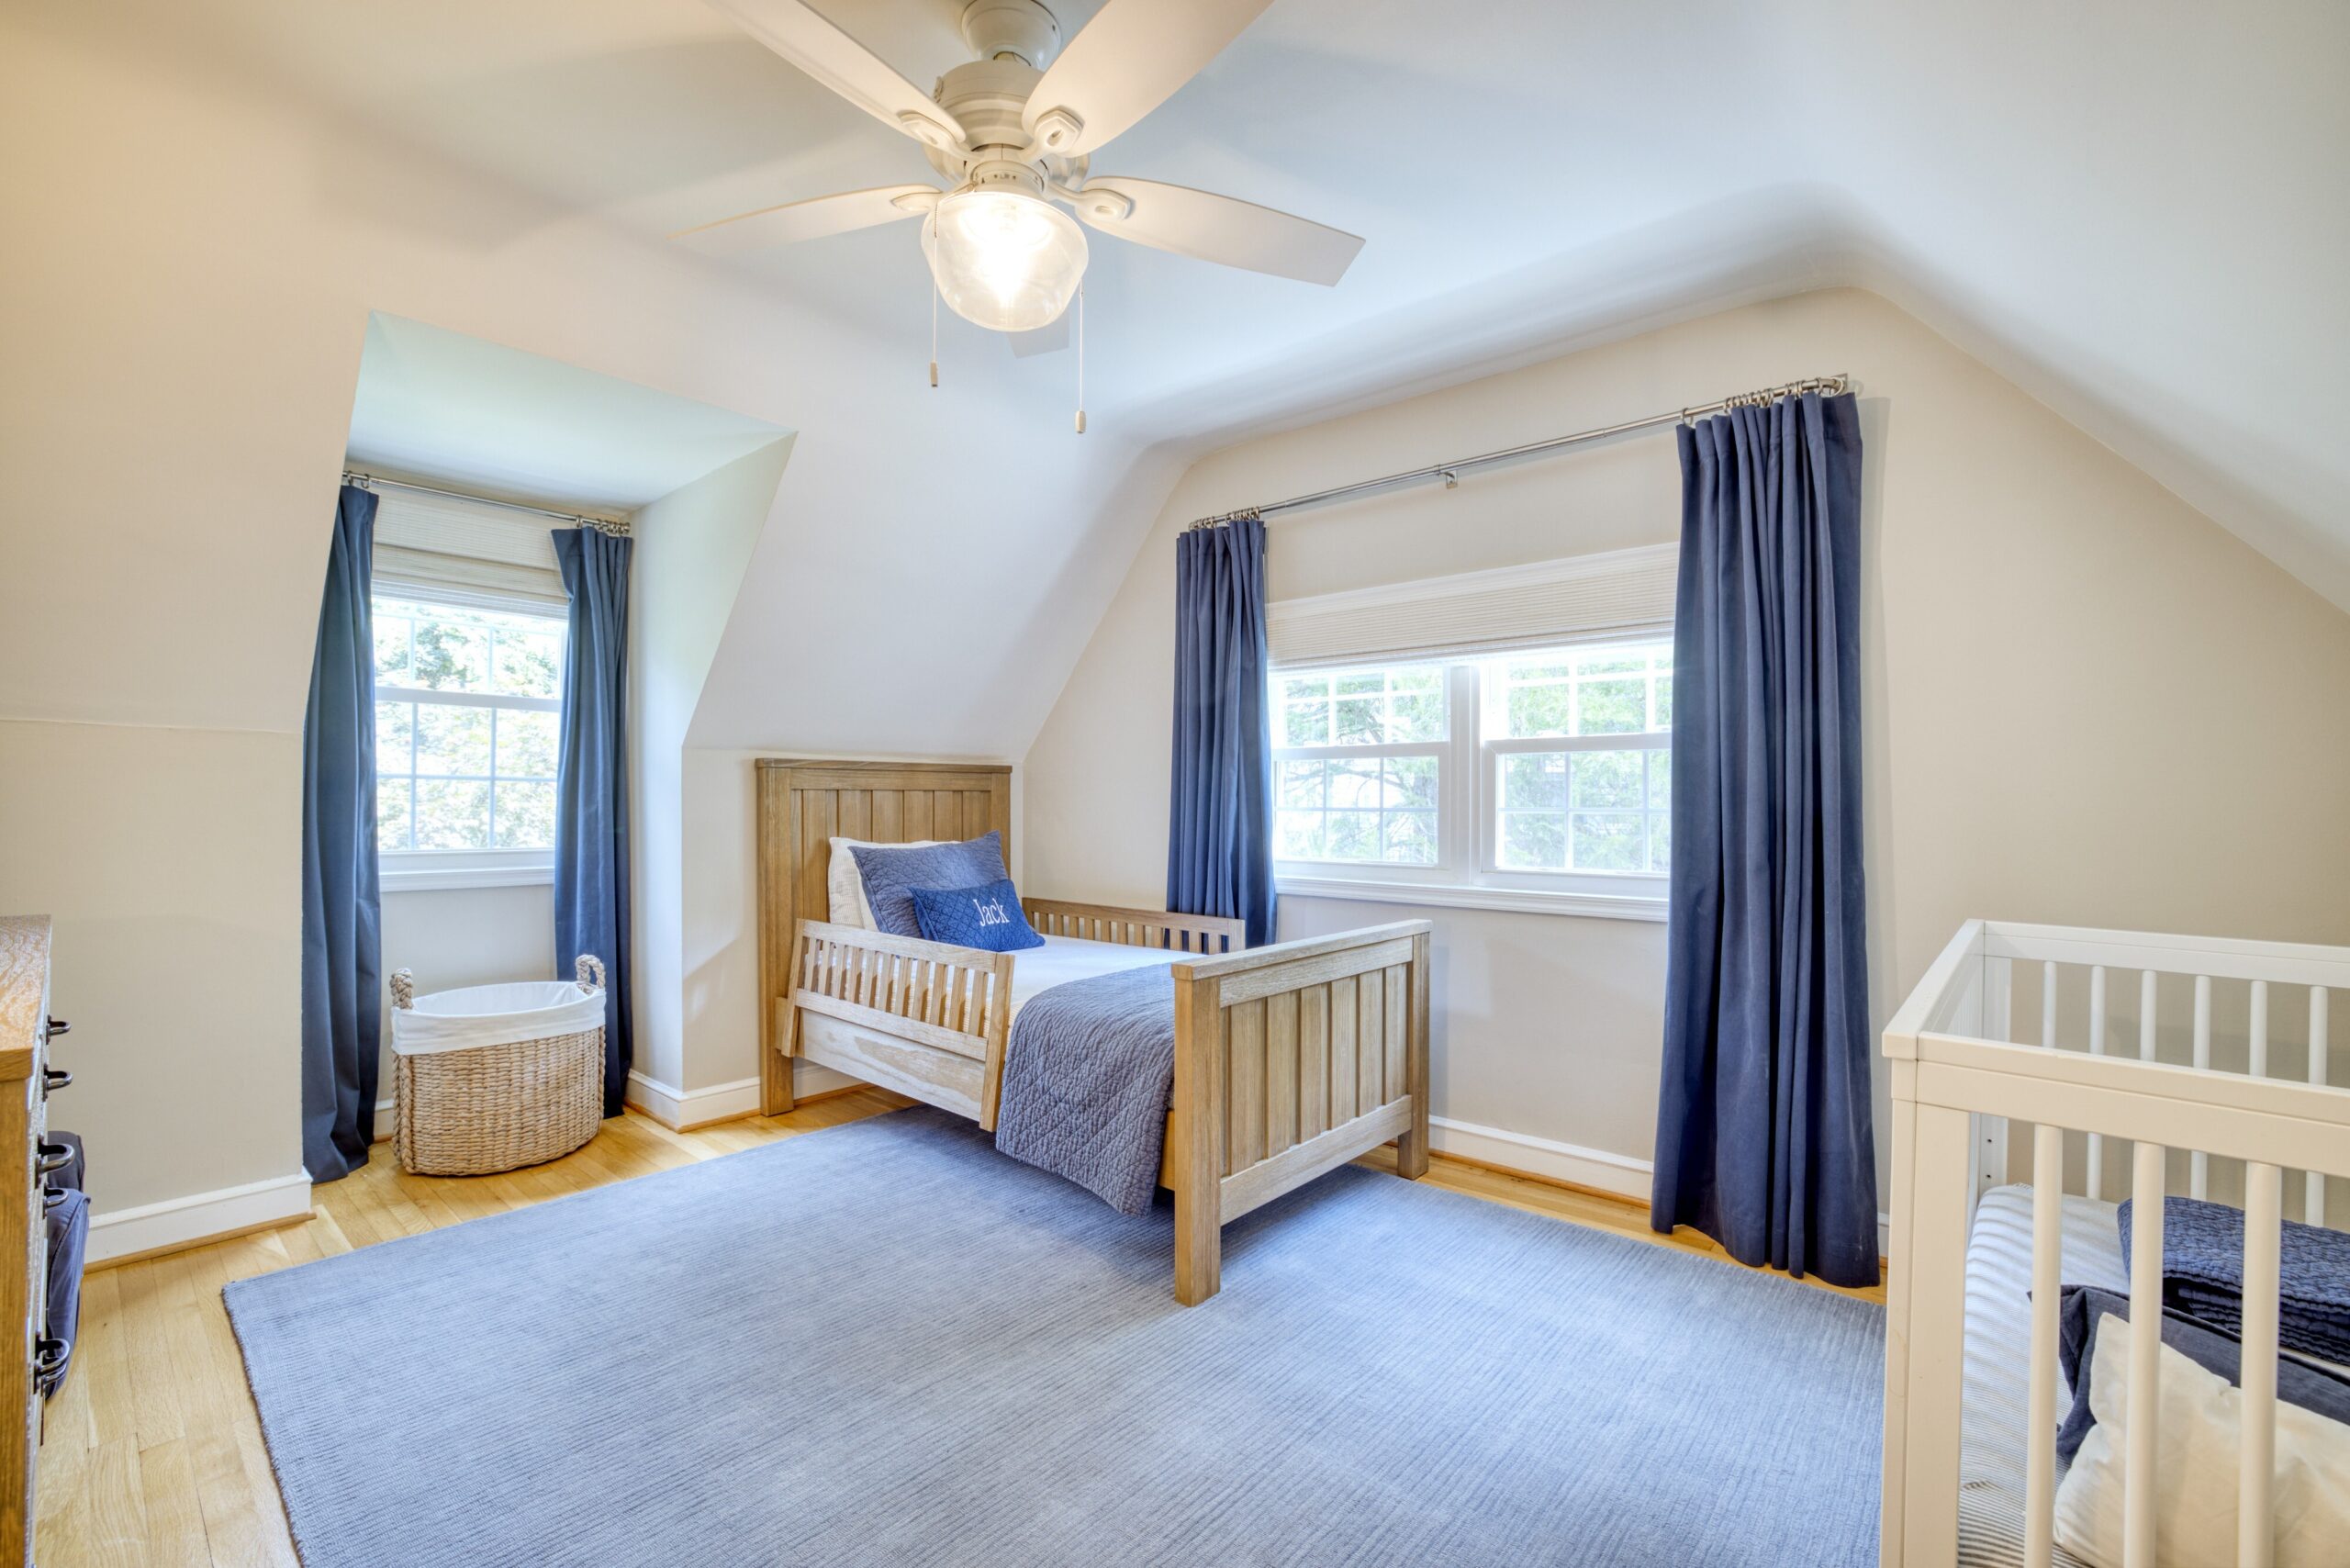 Interior professional photo of child's bedroom of 1946 Cape Cod home in Alexandria, VA with neutral blue staging